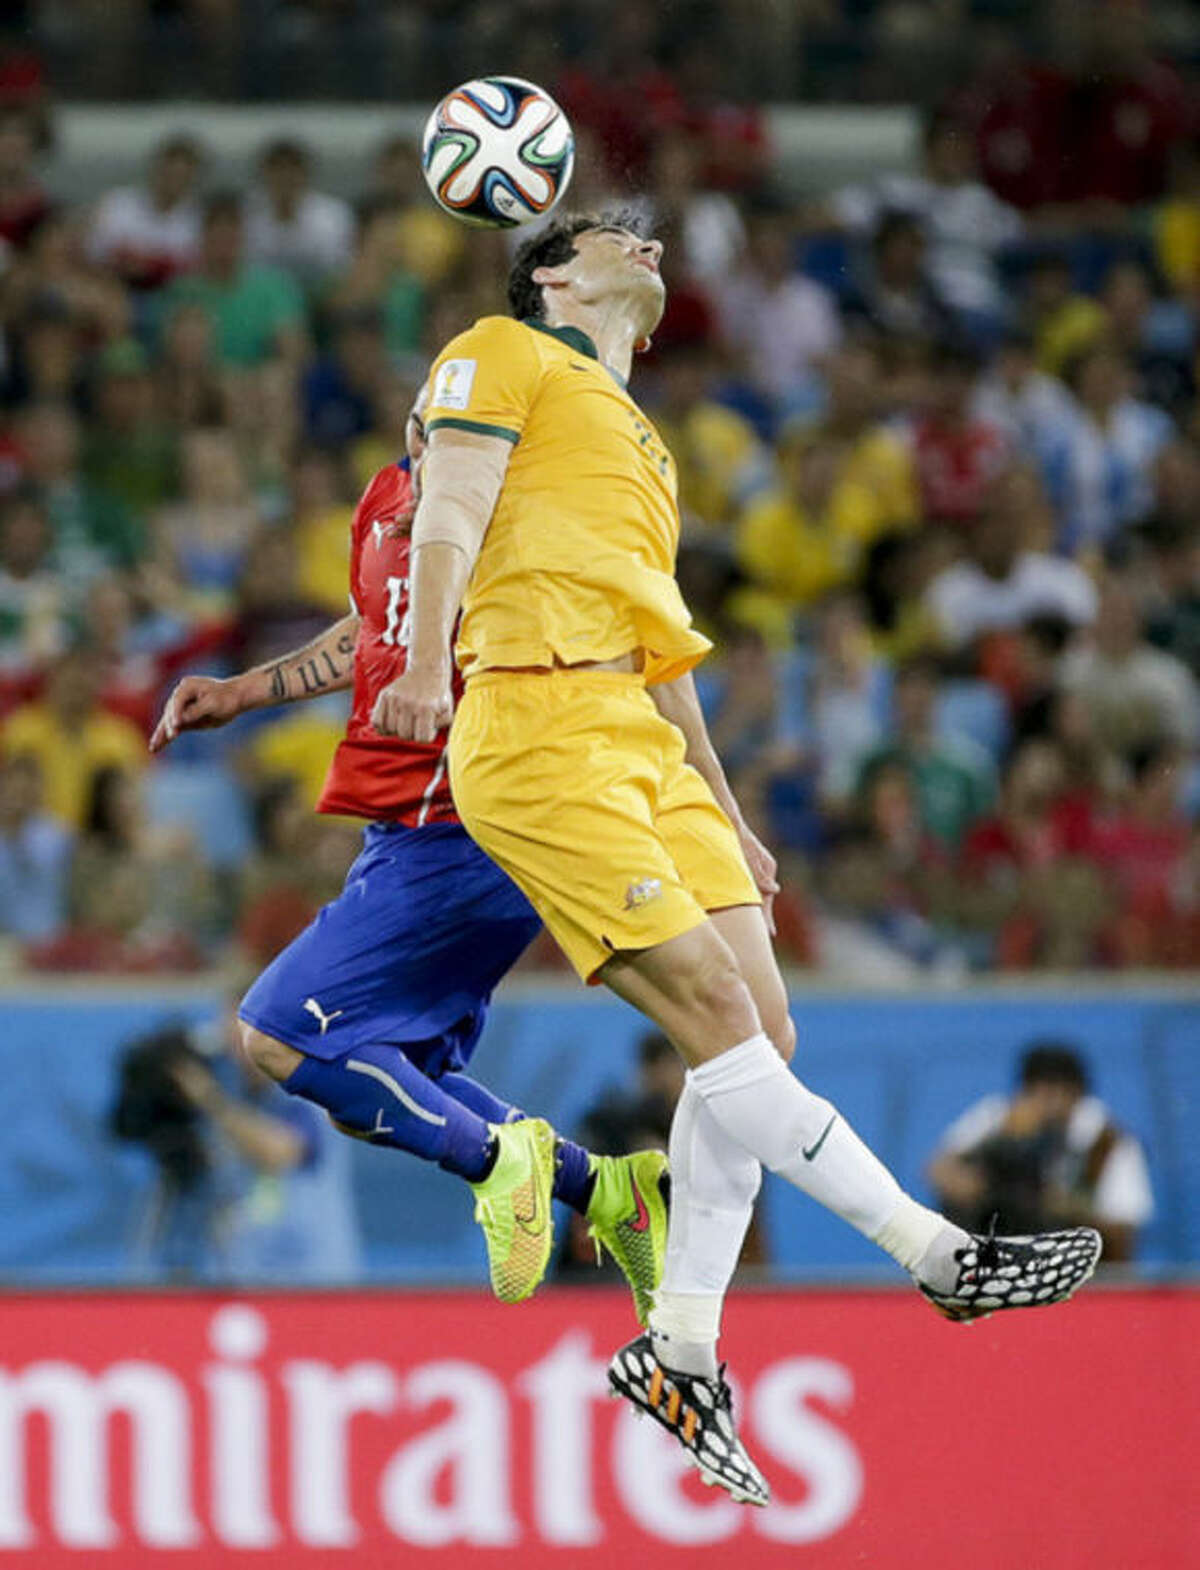 Australia's Mile Jedinak, front, rises above Chile's Gary Medel to win a header during the group B World Cup soccer match between Chile and Australia in the Arena Pantanal in Cuiaba, Brazil, Friday, June 13, 2014. (AP Photo/Felipe Dana)